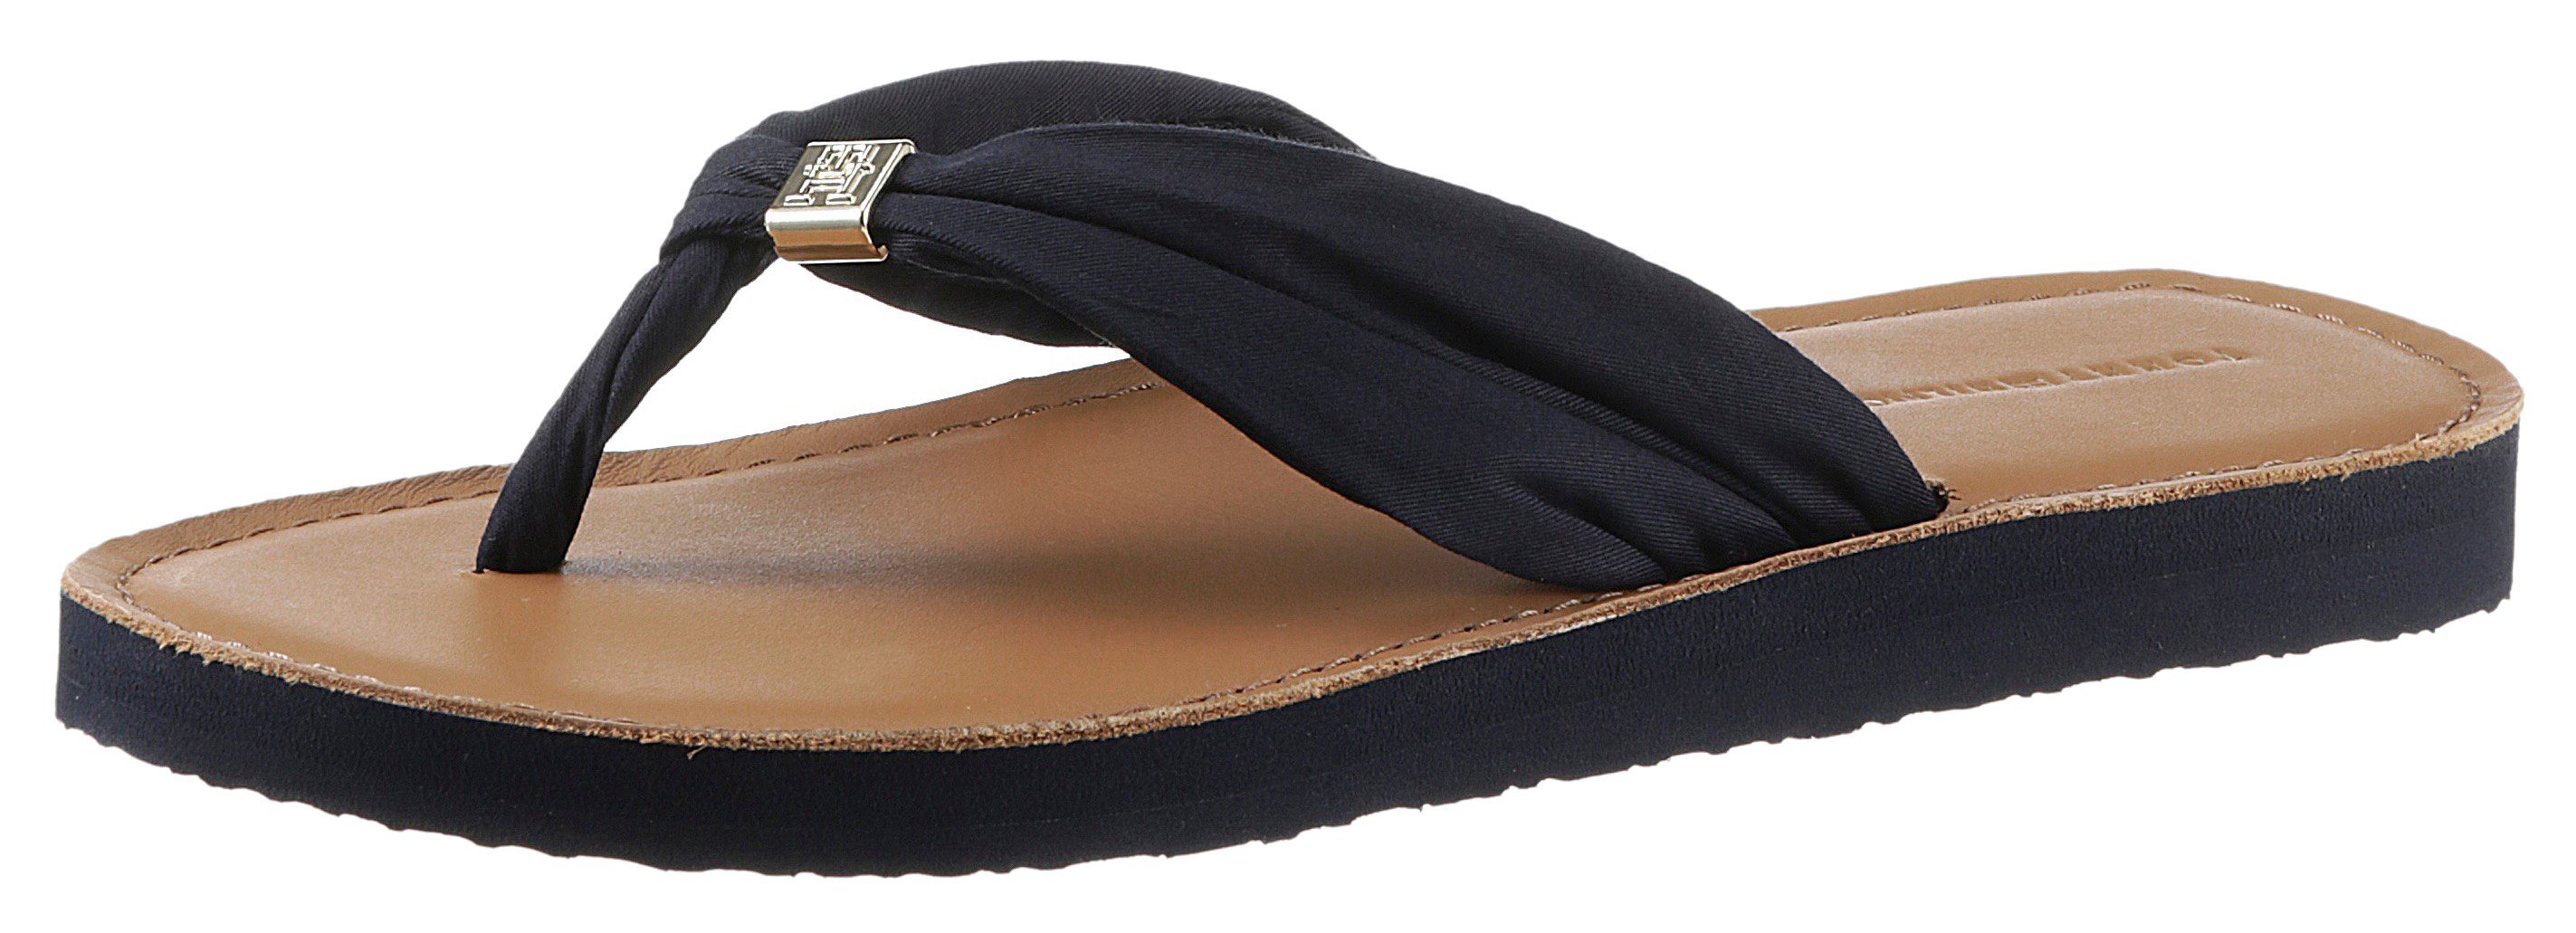 Tommy Hilfiger TH ELEVATED BEACH SANDAL Шлепанцы, Sommerschuh, Schlappen mit Label